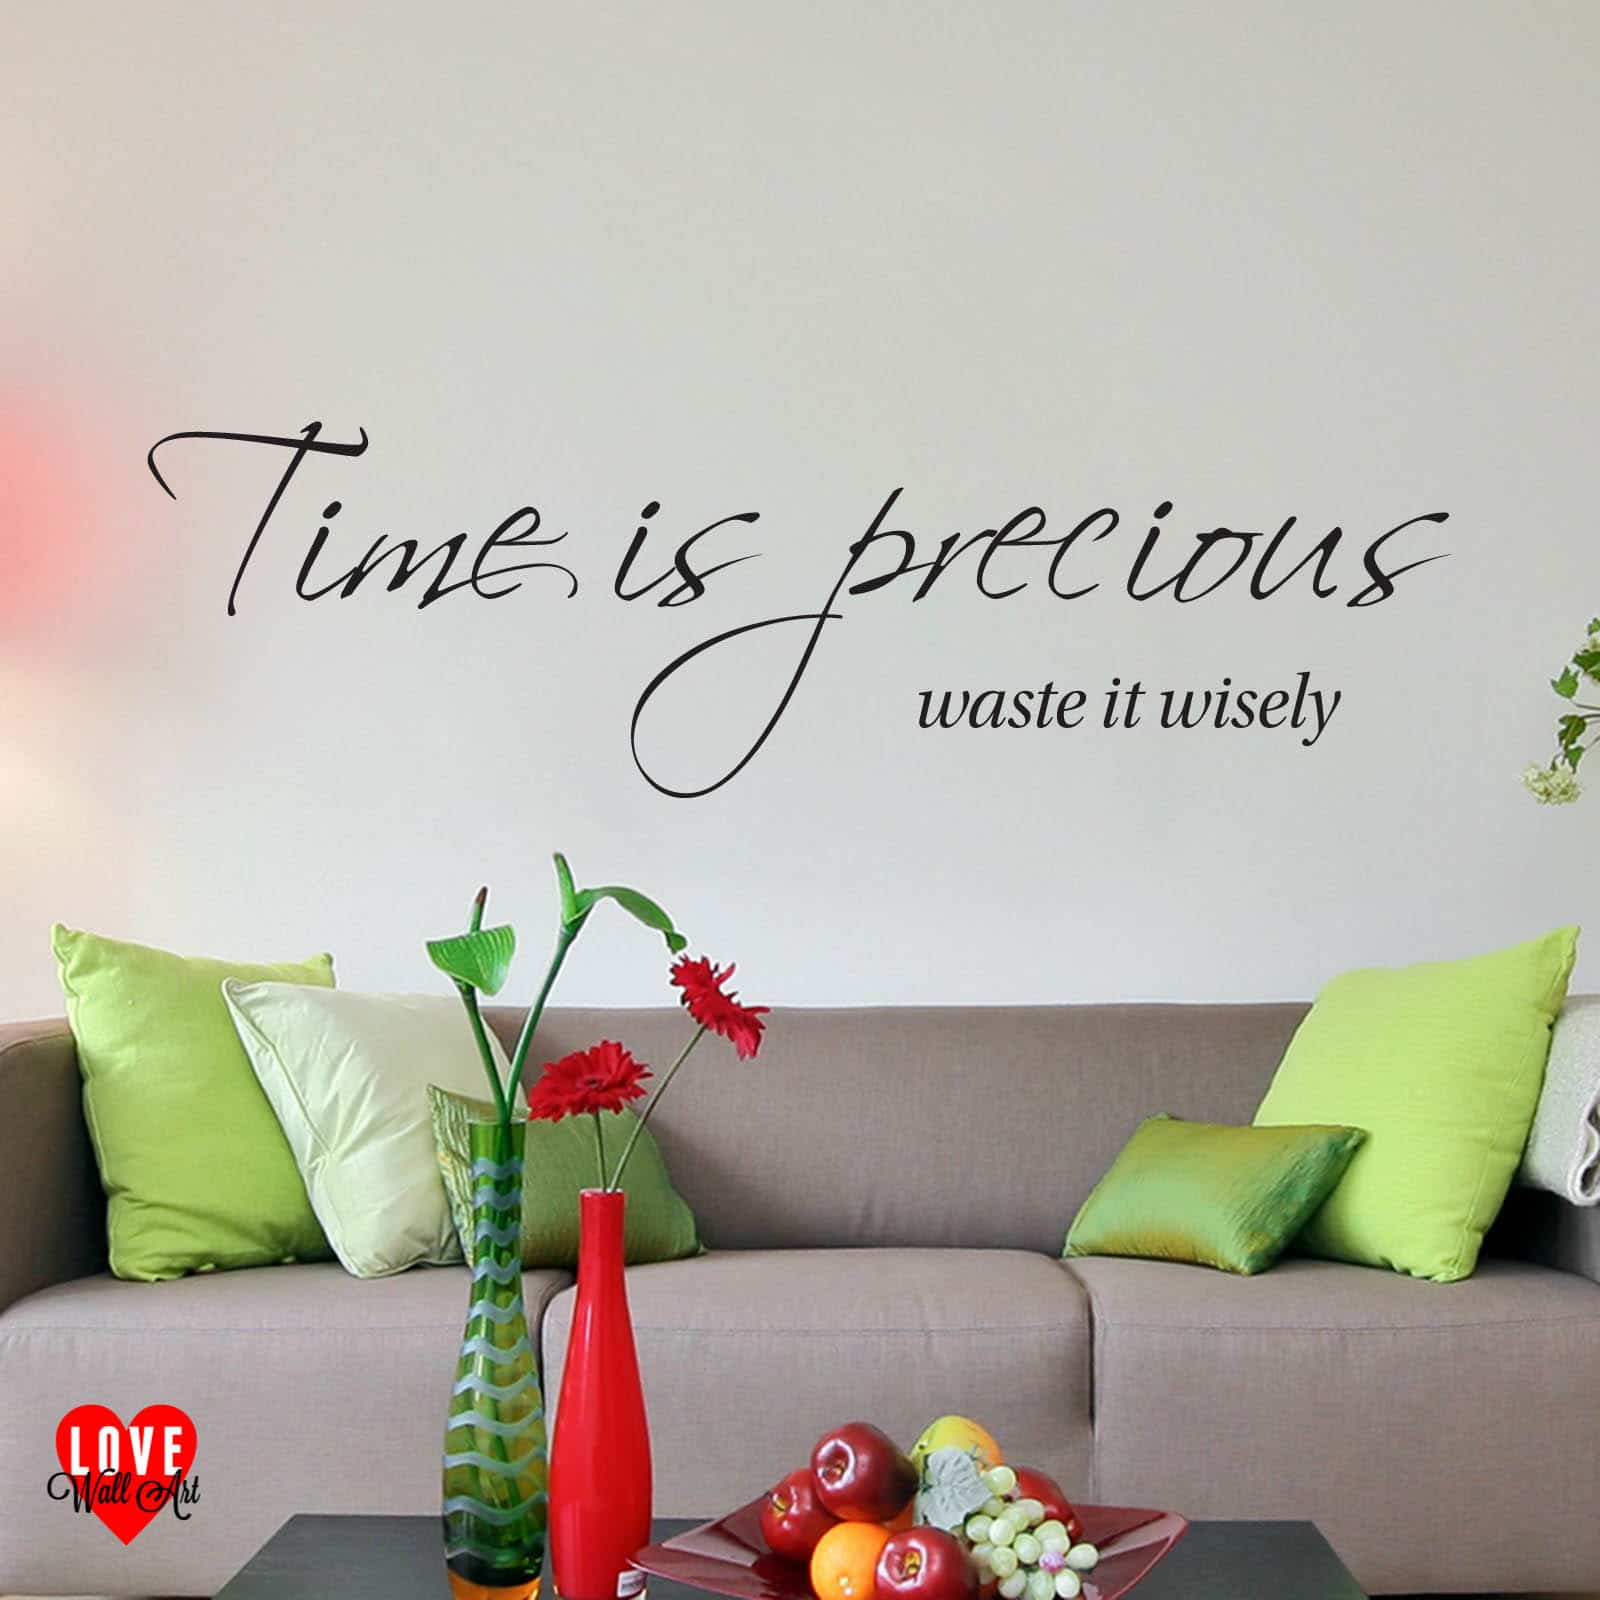 TIME IS PRECIOUS WASTE IT WISELY Wall Art Sticker Quote Decal Modern Transfer 